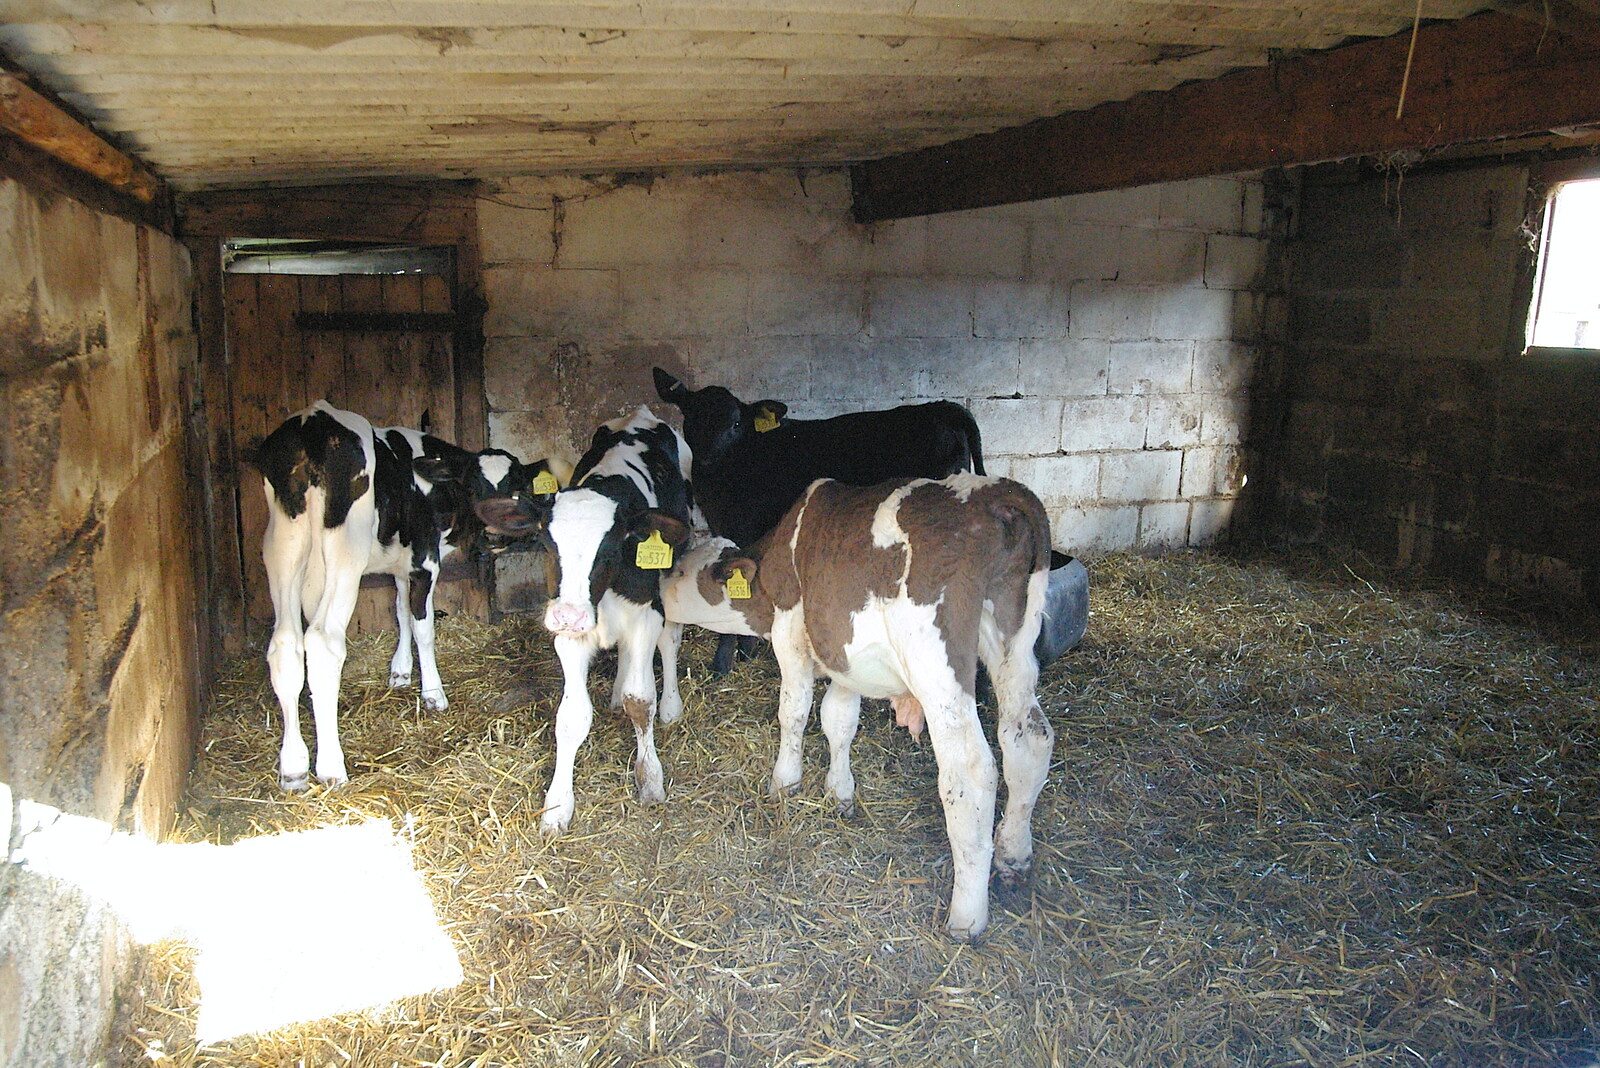 Some young calves in a shed from Life on the Neonatal Ward, Dairy Farm and Thrandeston Chapel, Suffolk - 26th August 2005